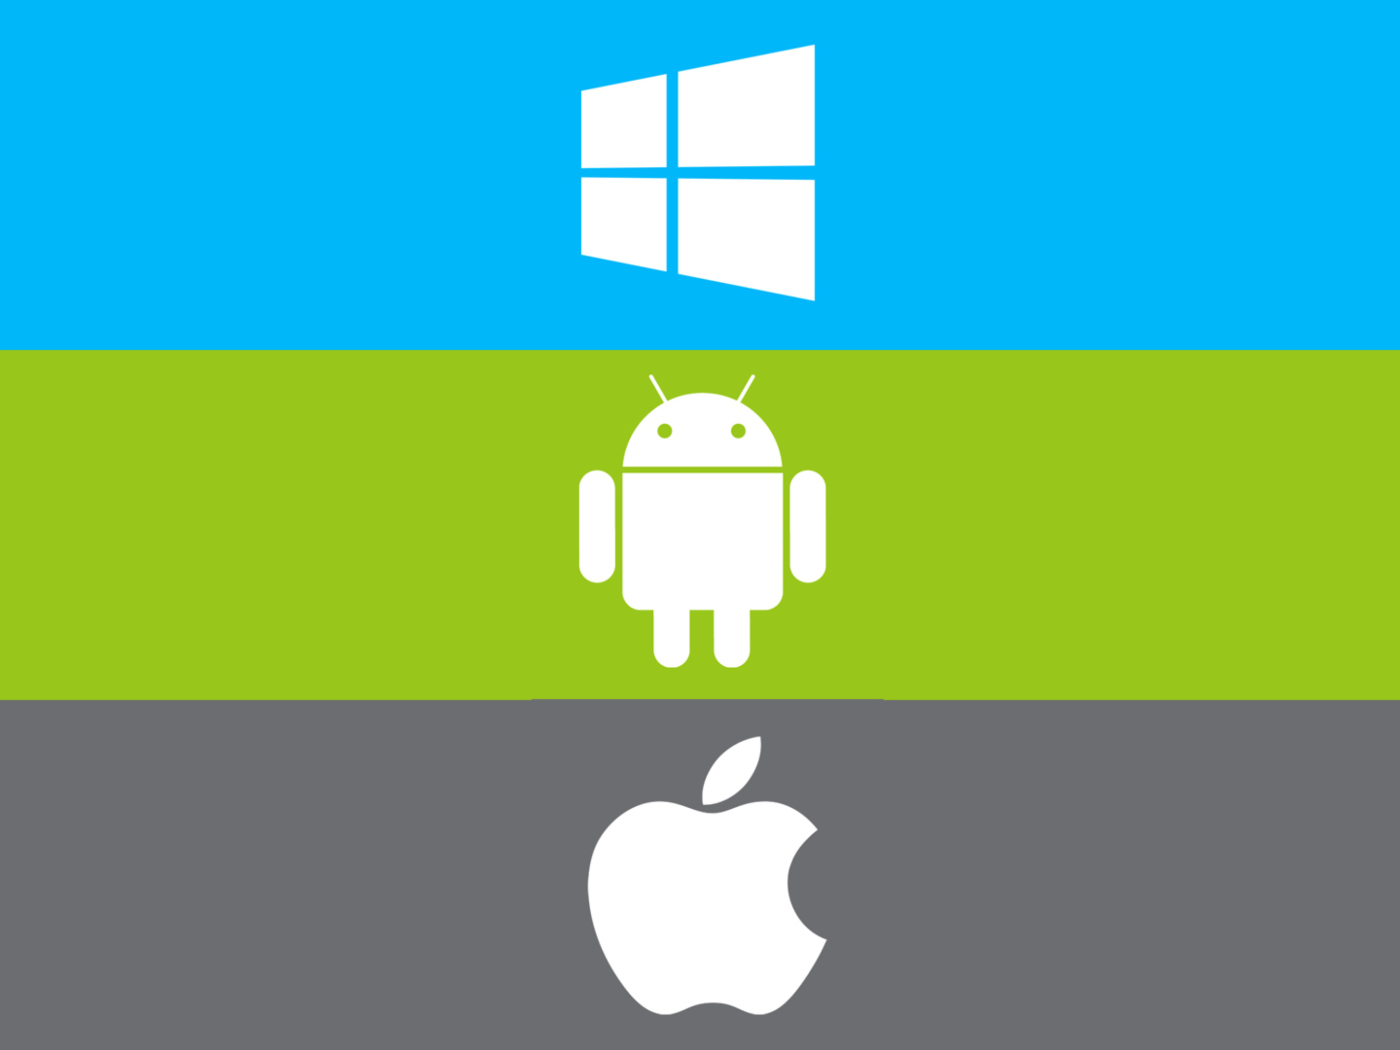 Windows, Apple, Android - What's Your Choice? wallpaper 1400x1050